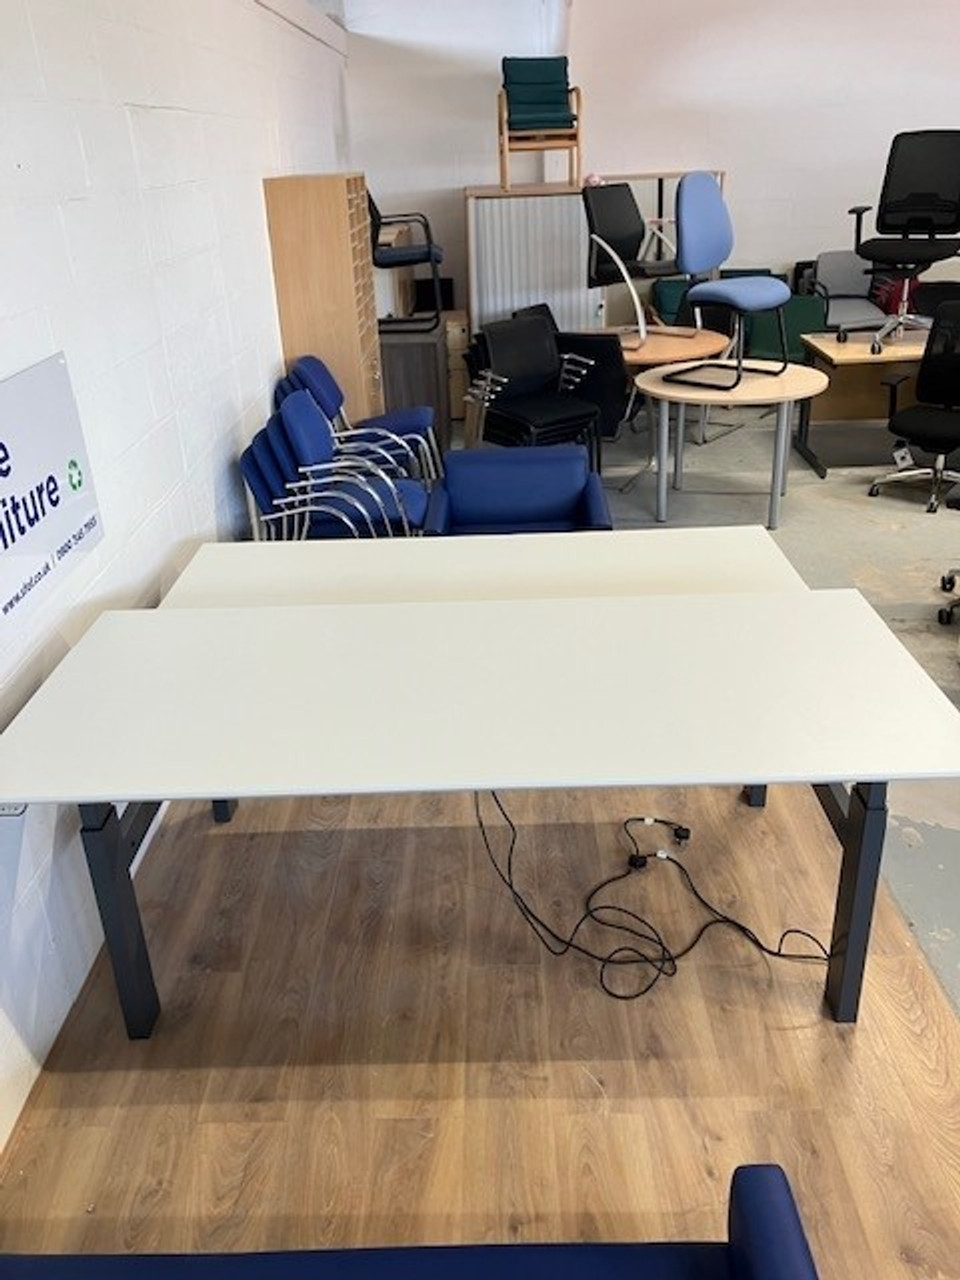 Used office furniture essex_office furniture showroom chelmsford_second hand height adjustable sit stand bench desk essex Humanscale 